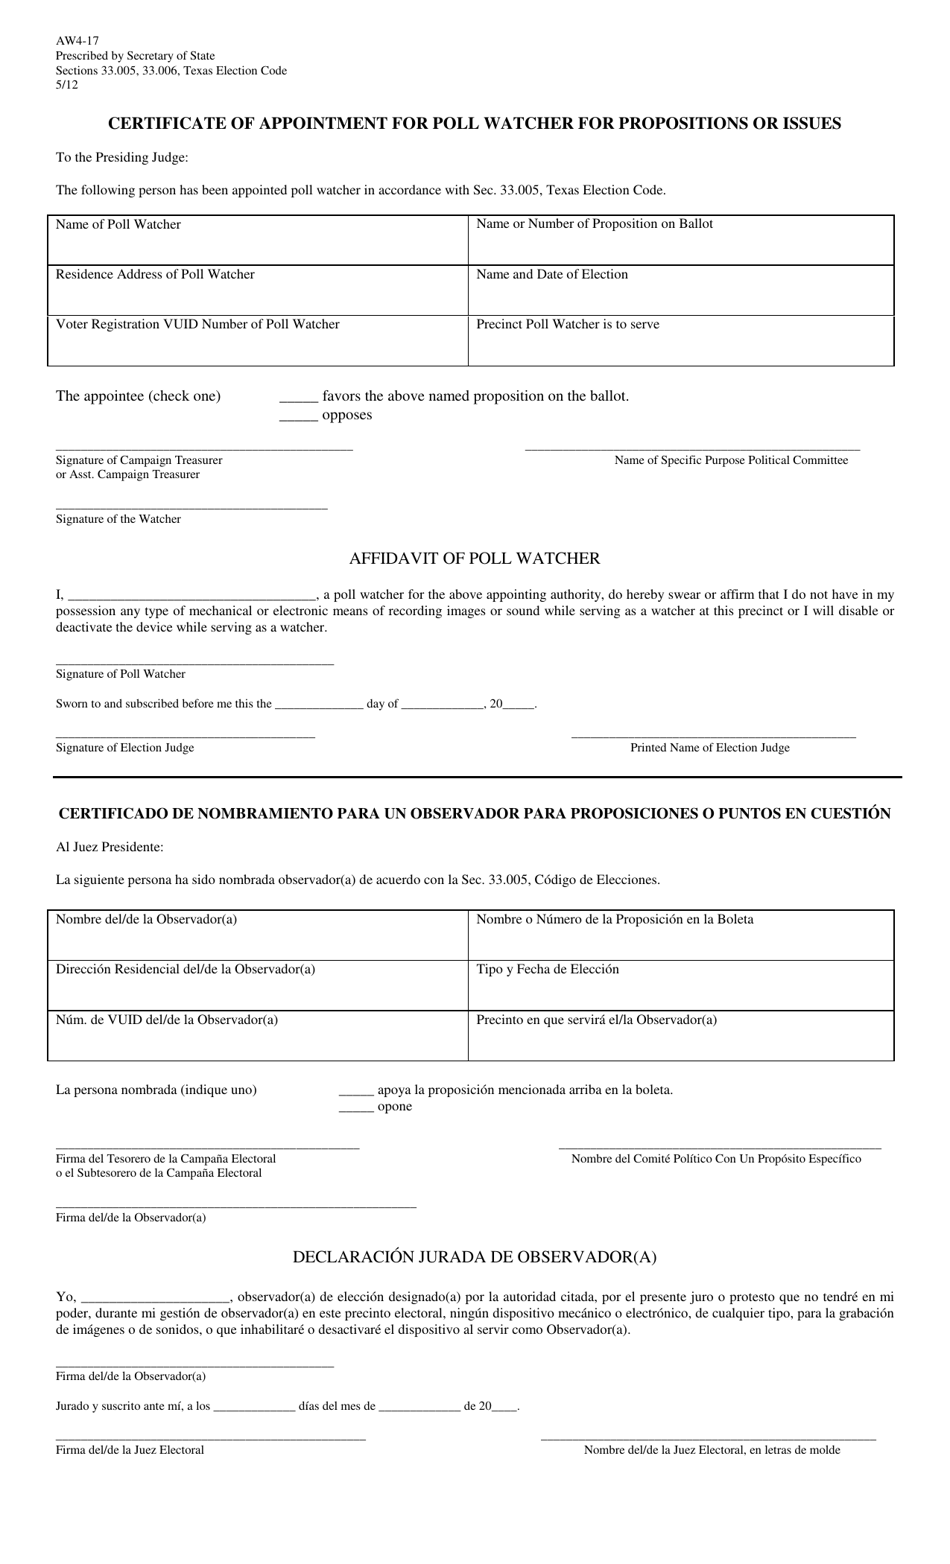 Form AW4-17 Certificate of Appointment for Poll Watcher for Propositions or Issues - Texas (English / Spanish), Page 1